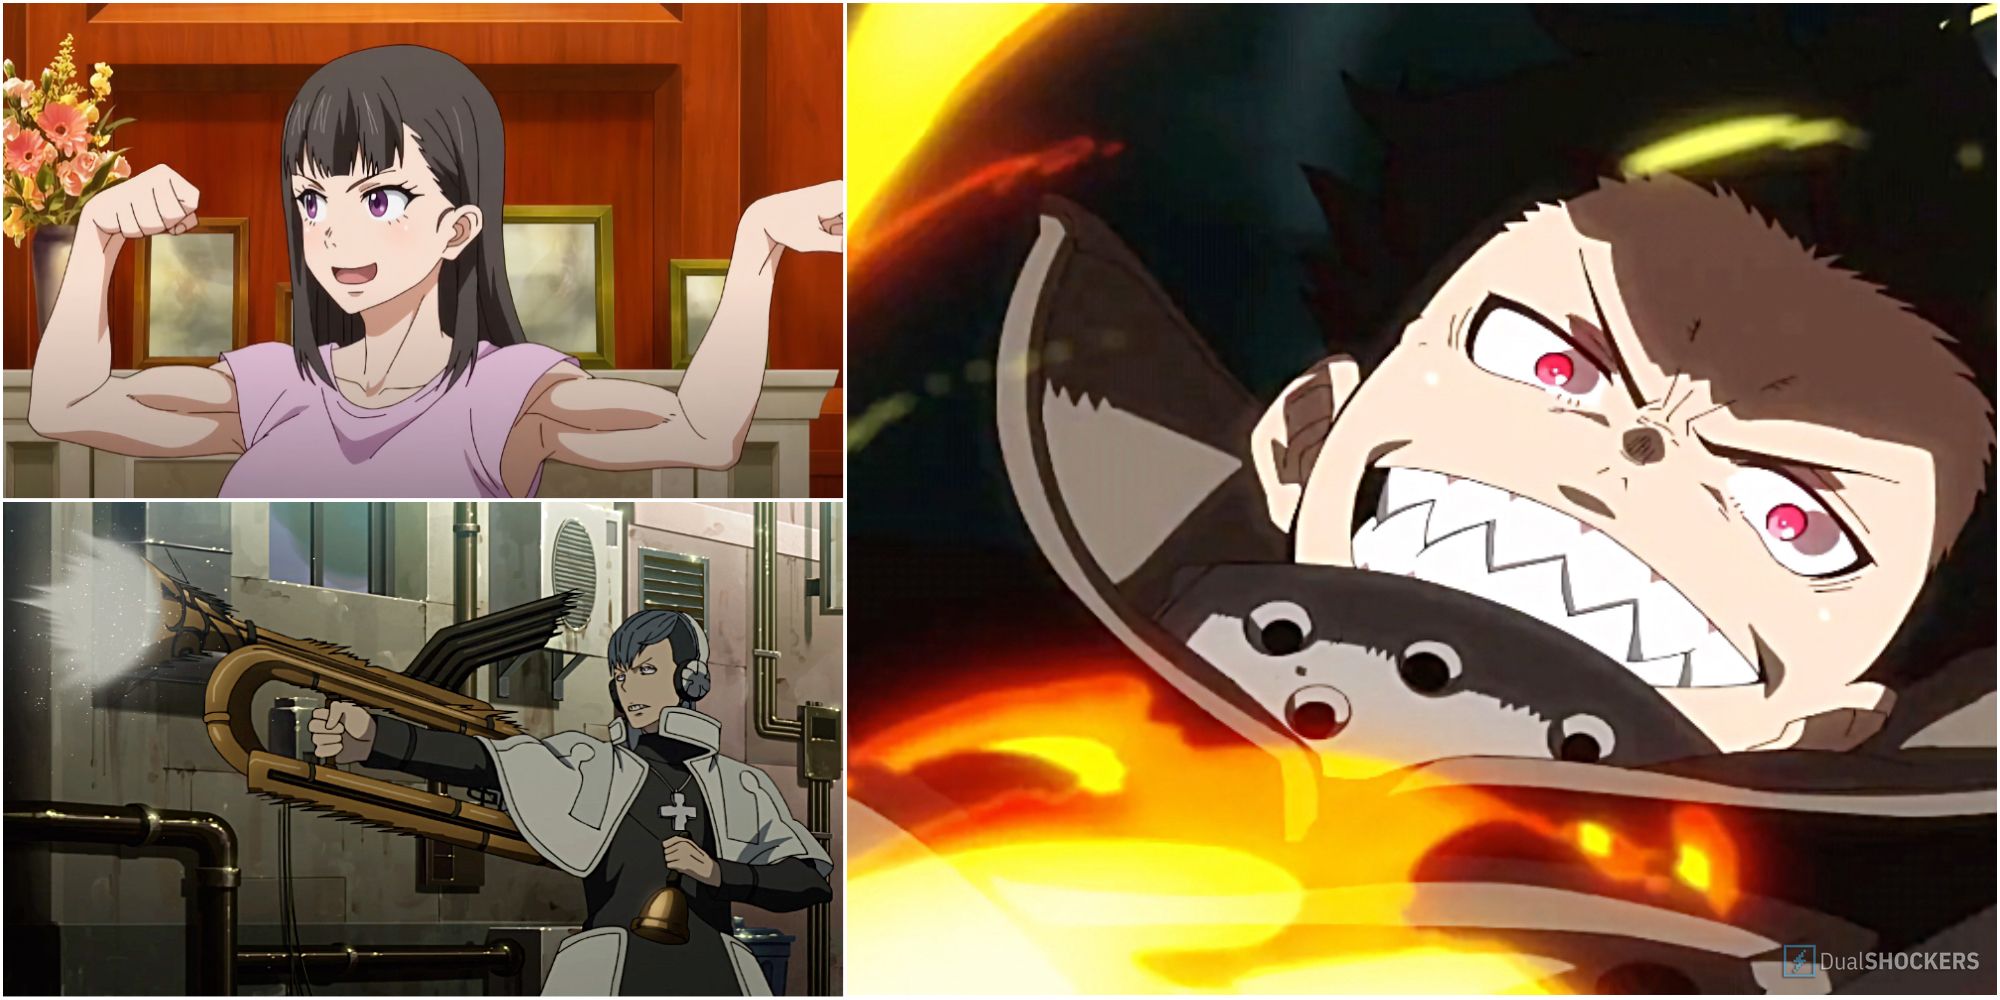 Fire Force: 10 Strongest Characters, Ranked